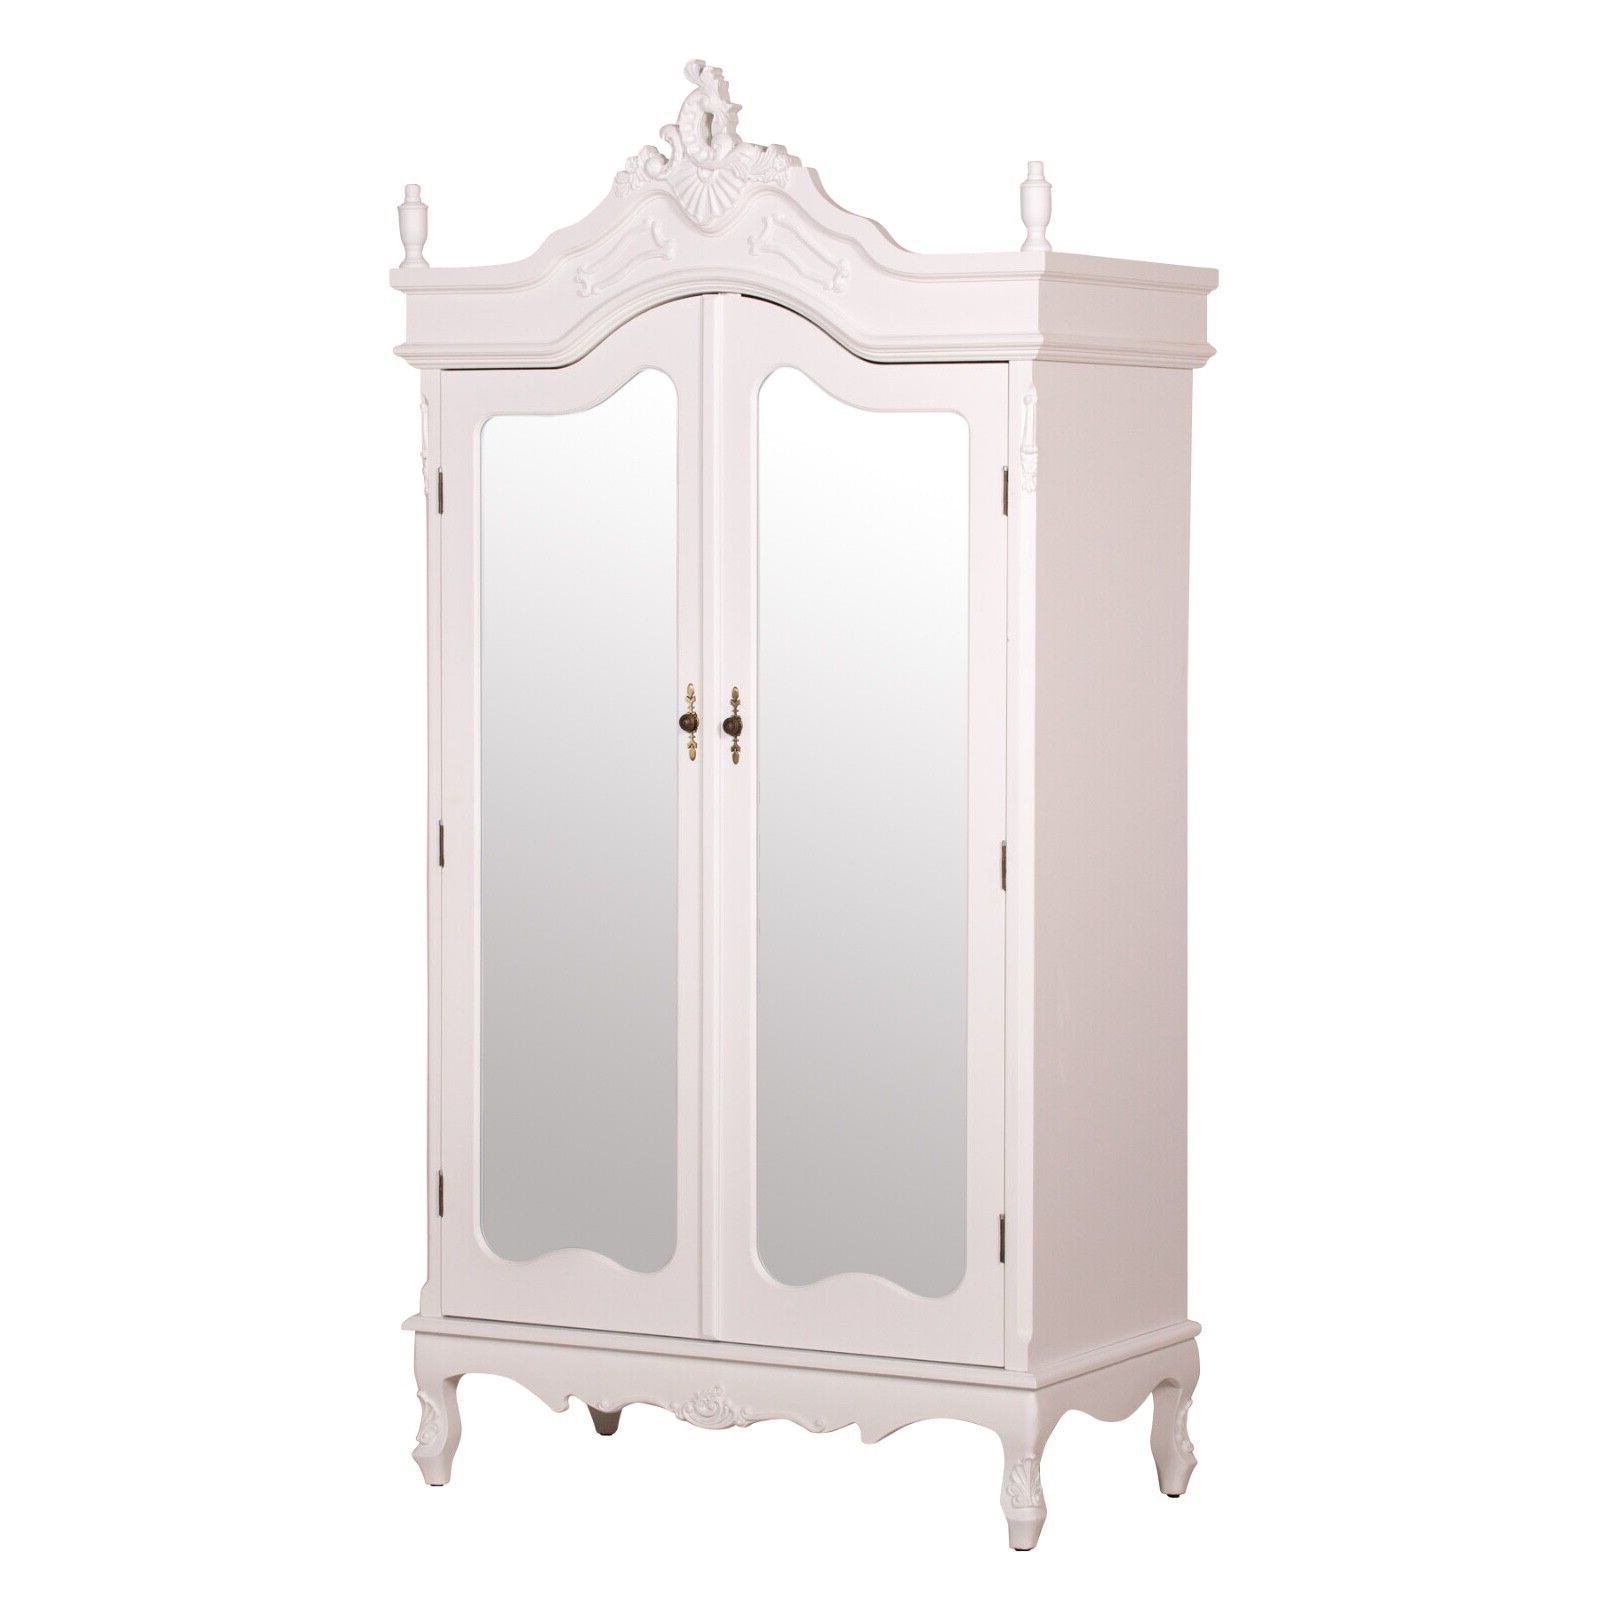 French Antique White Chateau Shabby Chic Mirrored Double Armoire Wardrobe |  Ebay For French Shabby Chic Wardrobes (Gallery 14 of 20)